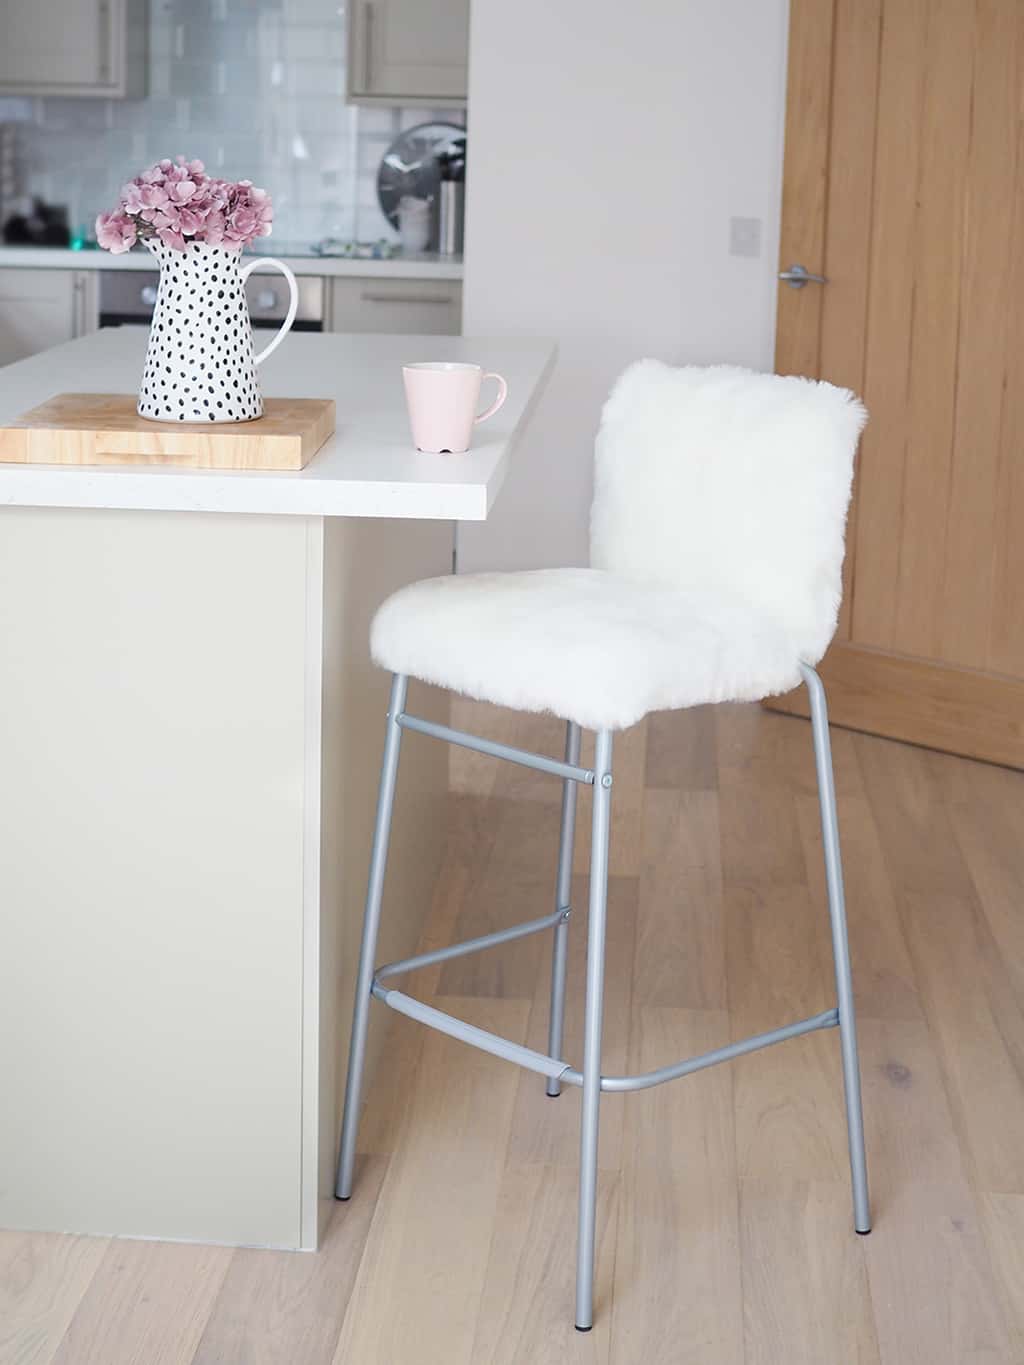 25 epic diy barstool ideas to help you transform your space